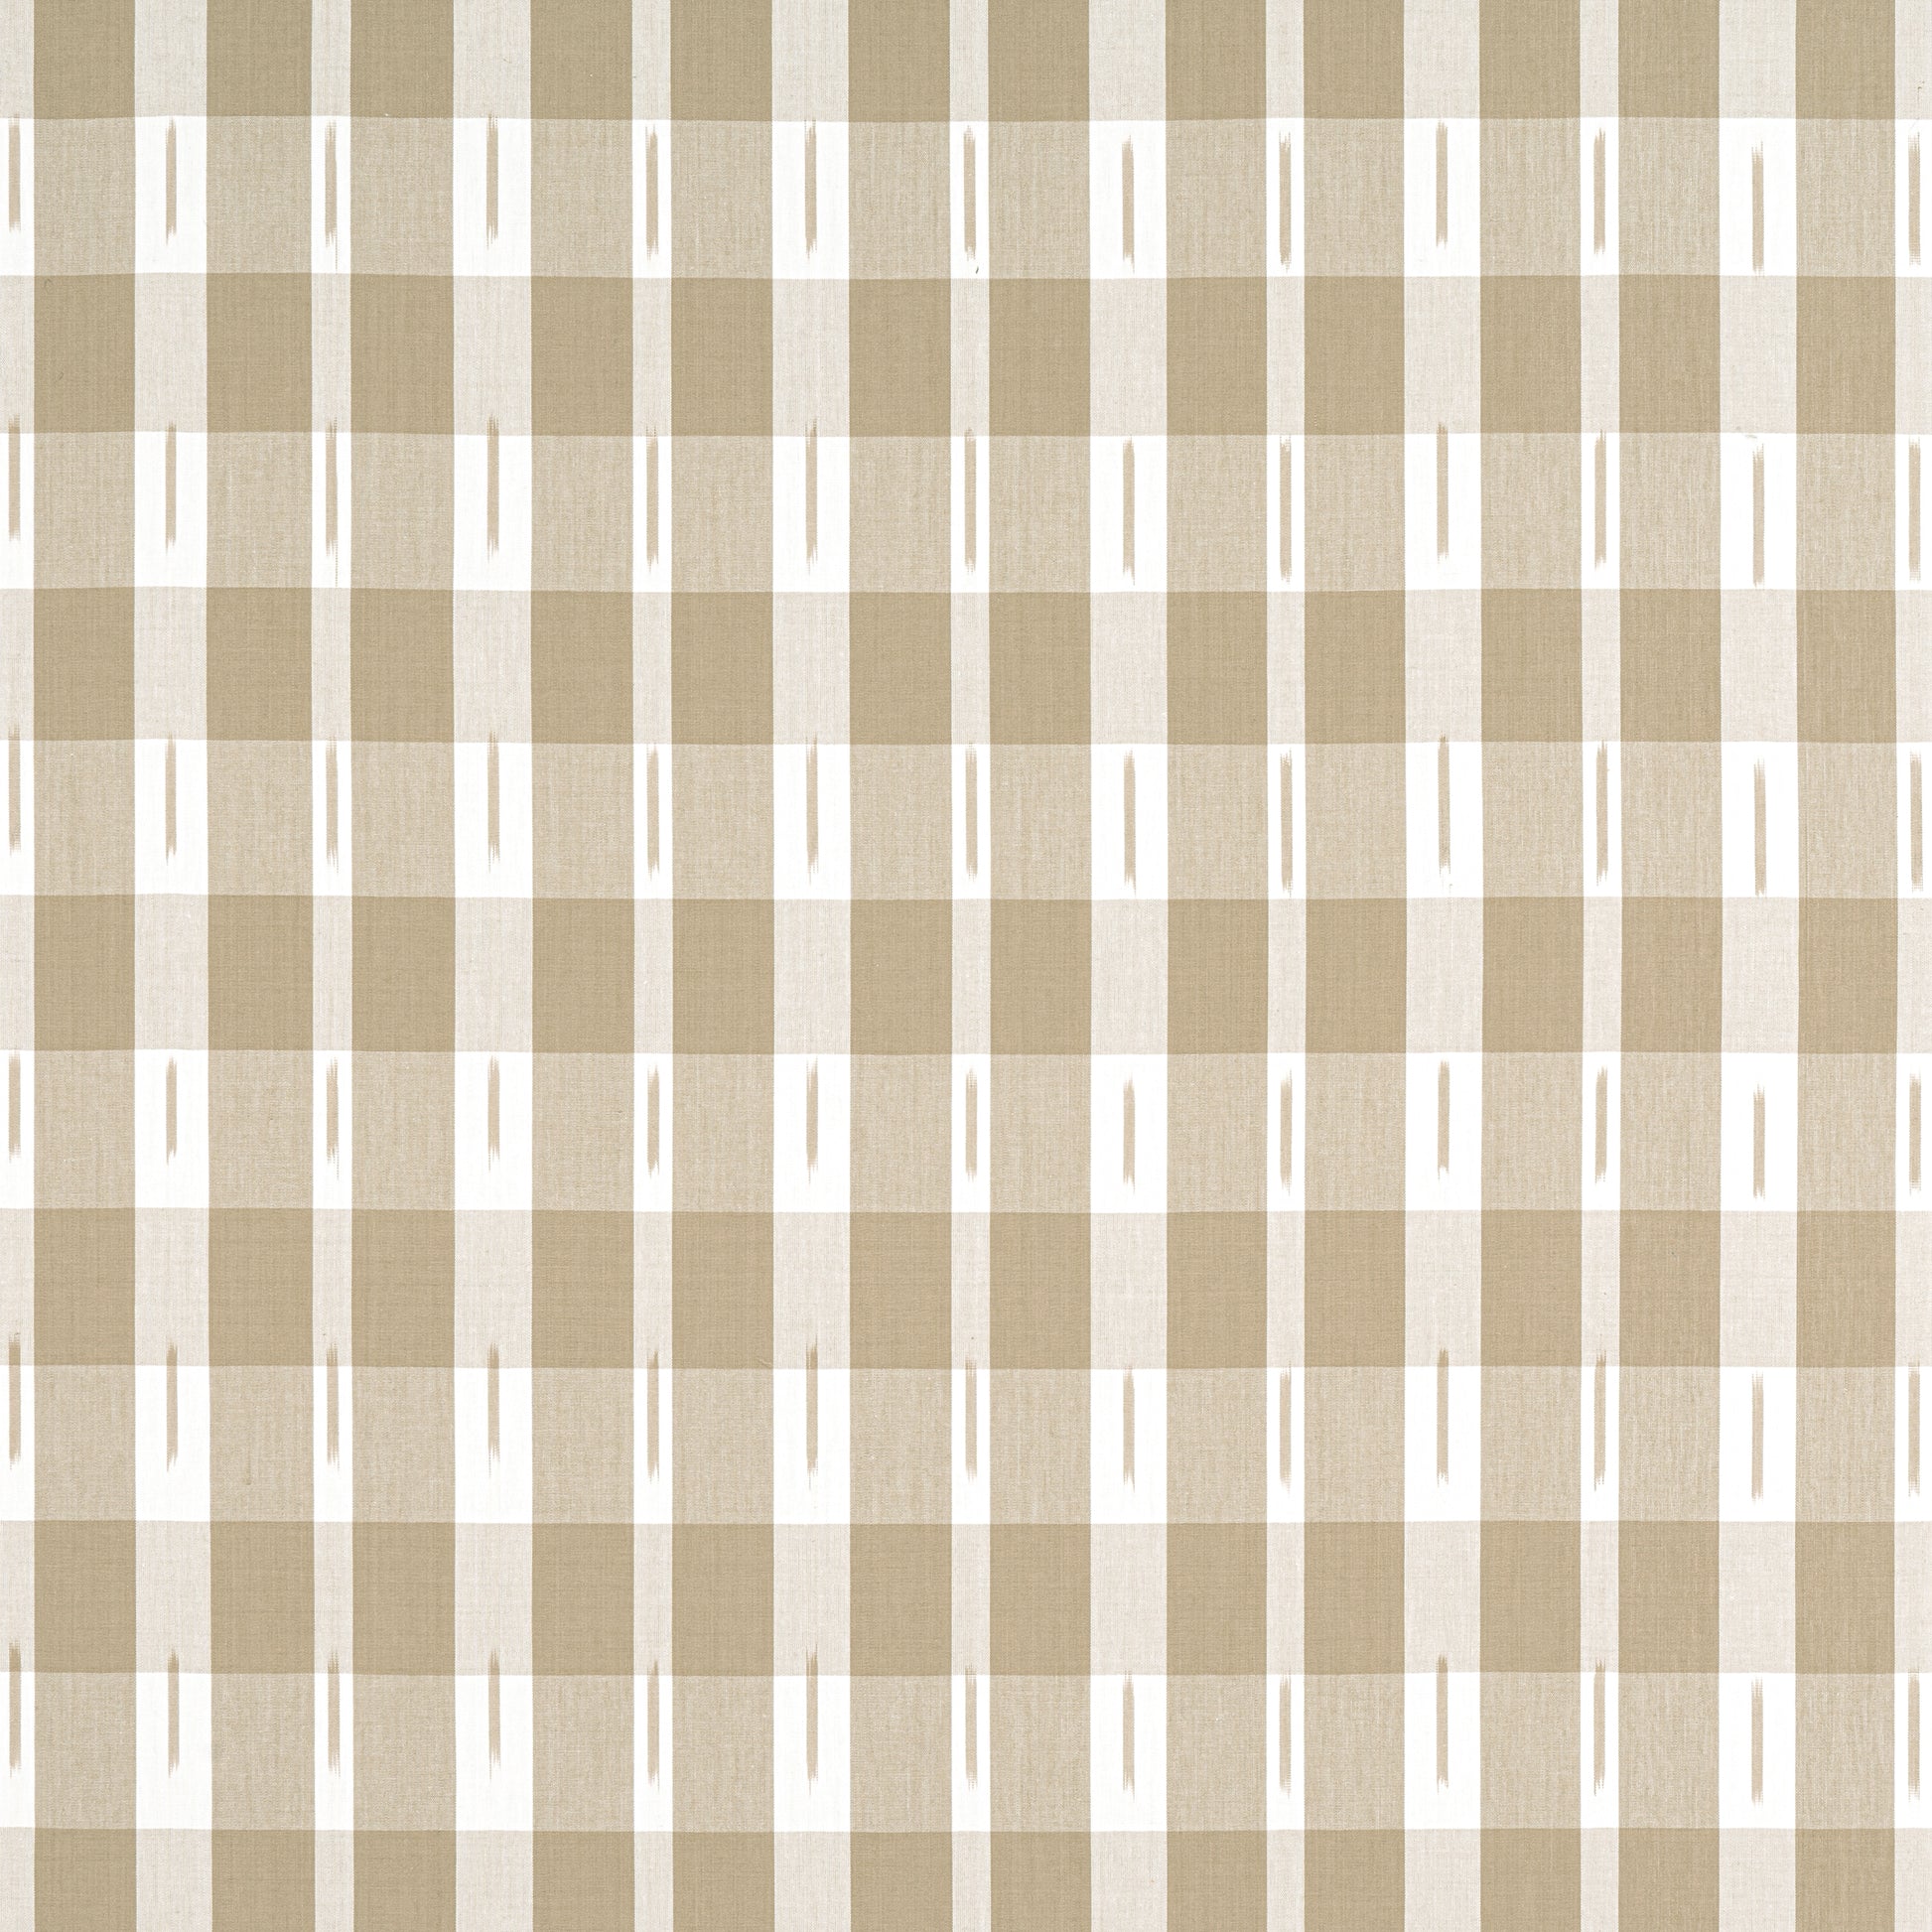 Purchase Thibaut Fabric Pattern# W736441 pattern name Ellagrey Check color Beige